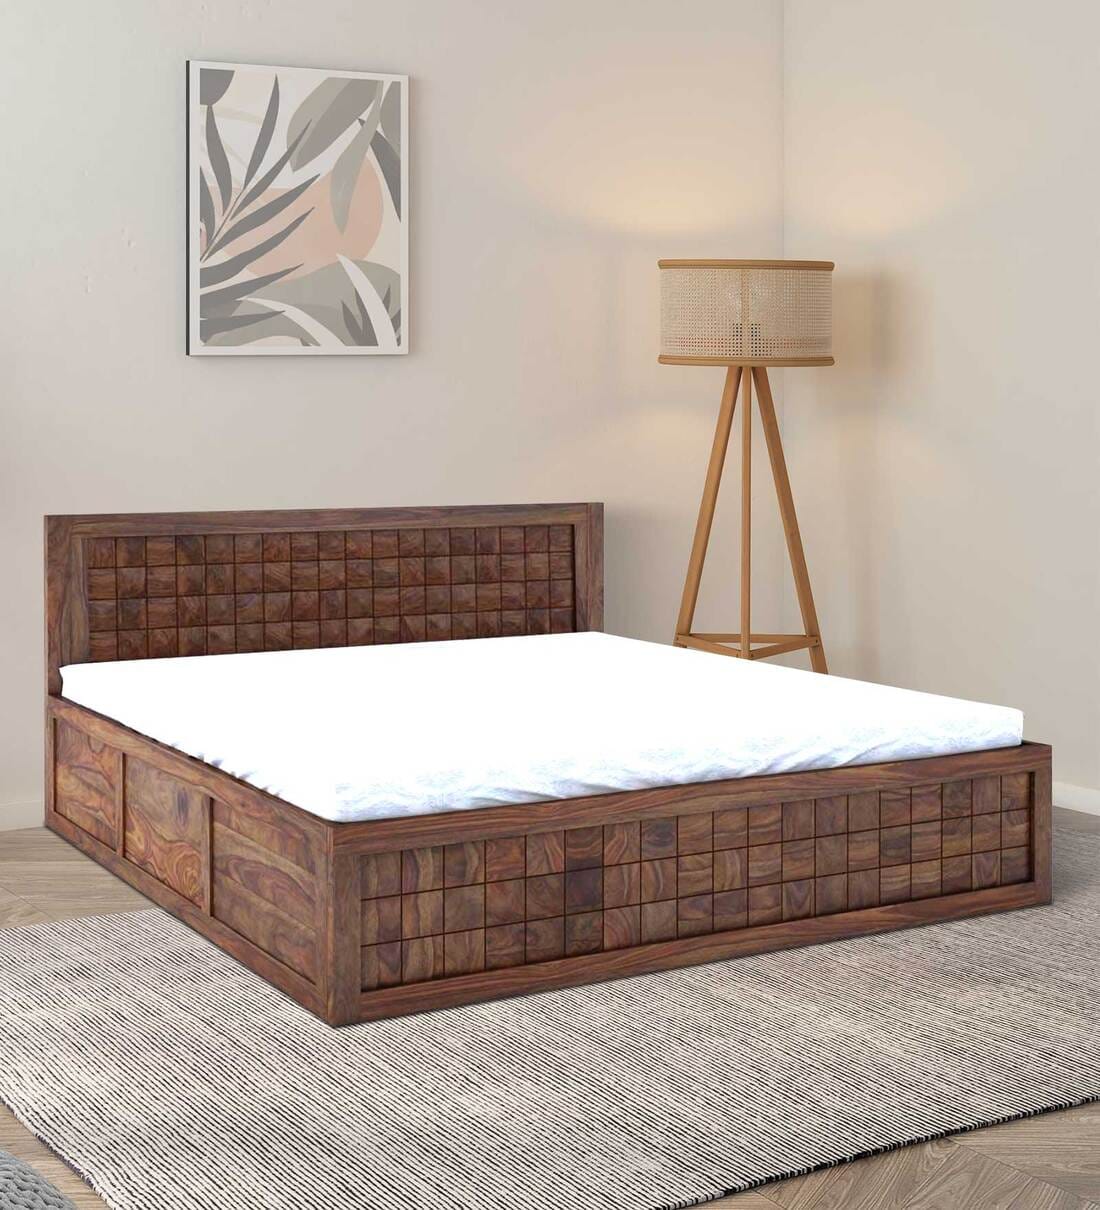 Buy Dreamer Sheesham Wood Queen Size Bed In Teak Finish With Drawer Storage At 42 Off By 8353